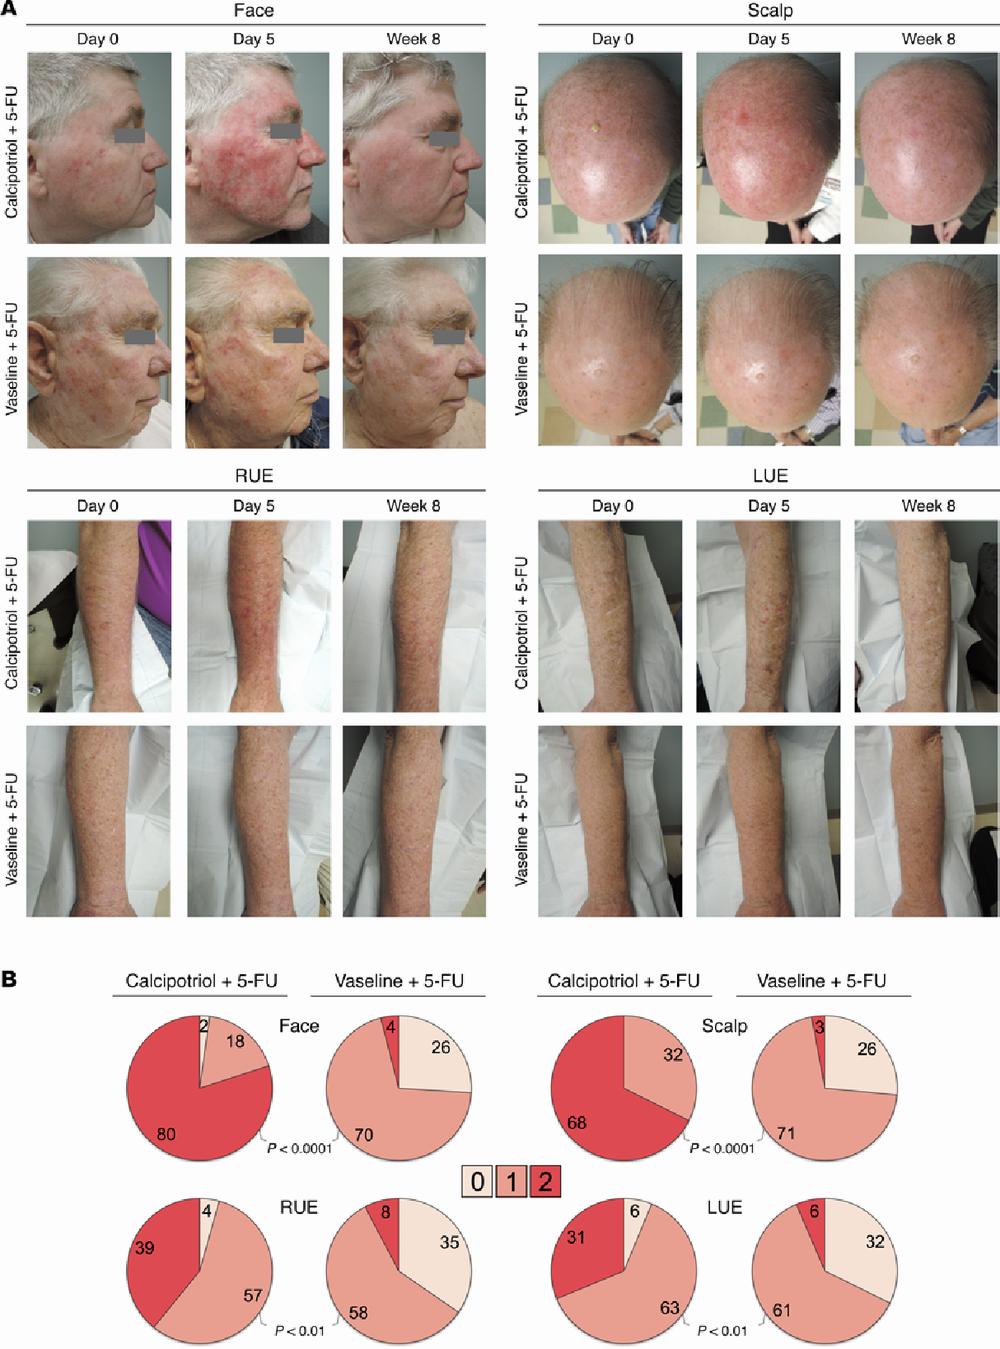 Calcipotriol ointment combined with 5-fluorouracil cream is more effective than Vaseline ointment combined with 5-fluorouracil cream in treating actinic keratosis.